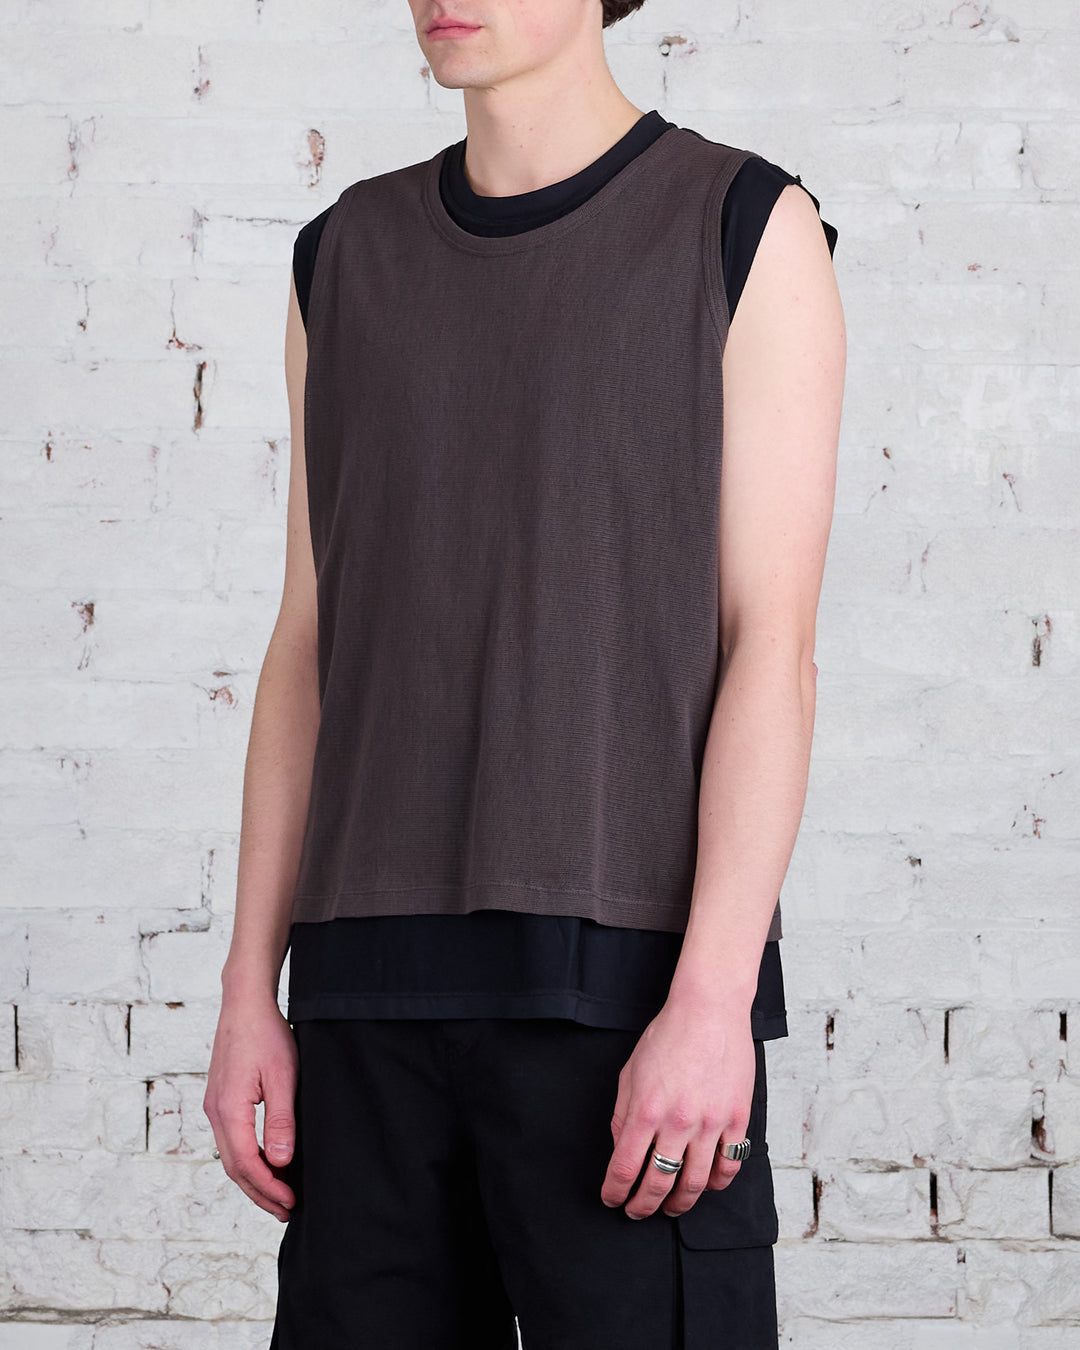 Our Legacy Reversible Gravity Tank Black/Antique Chocolate